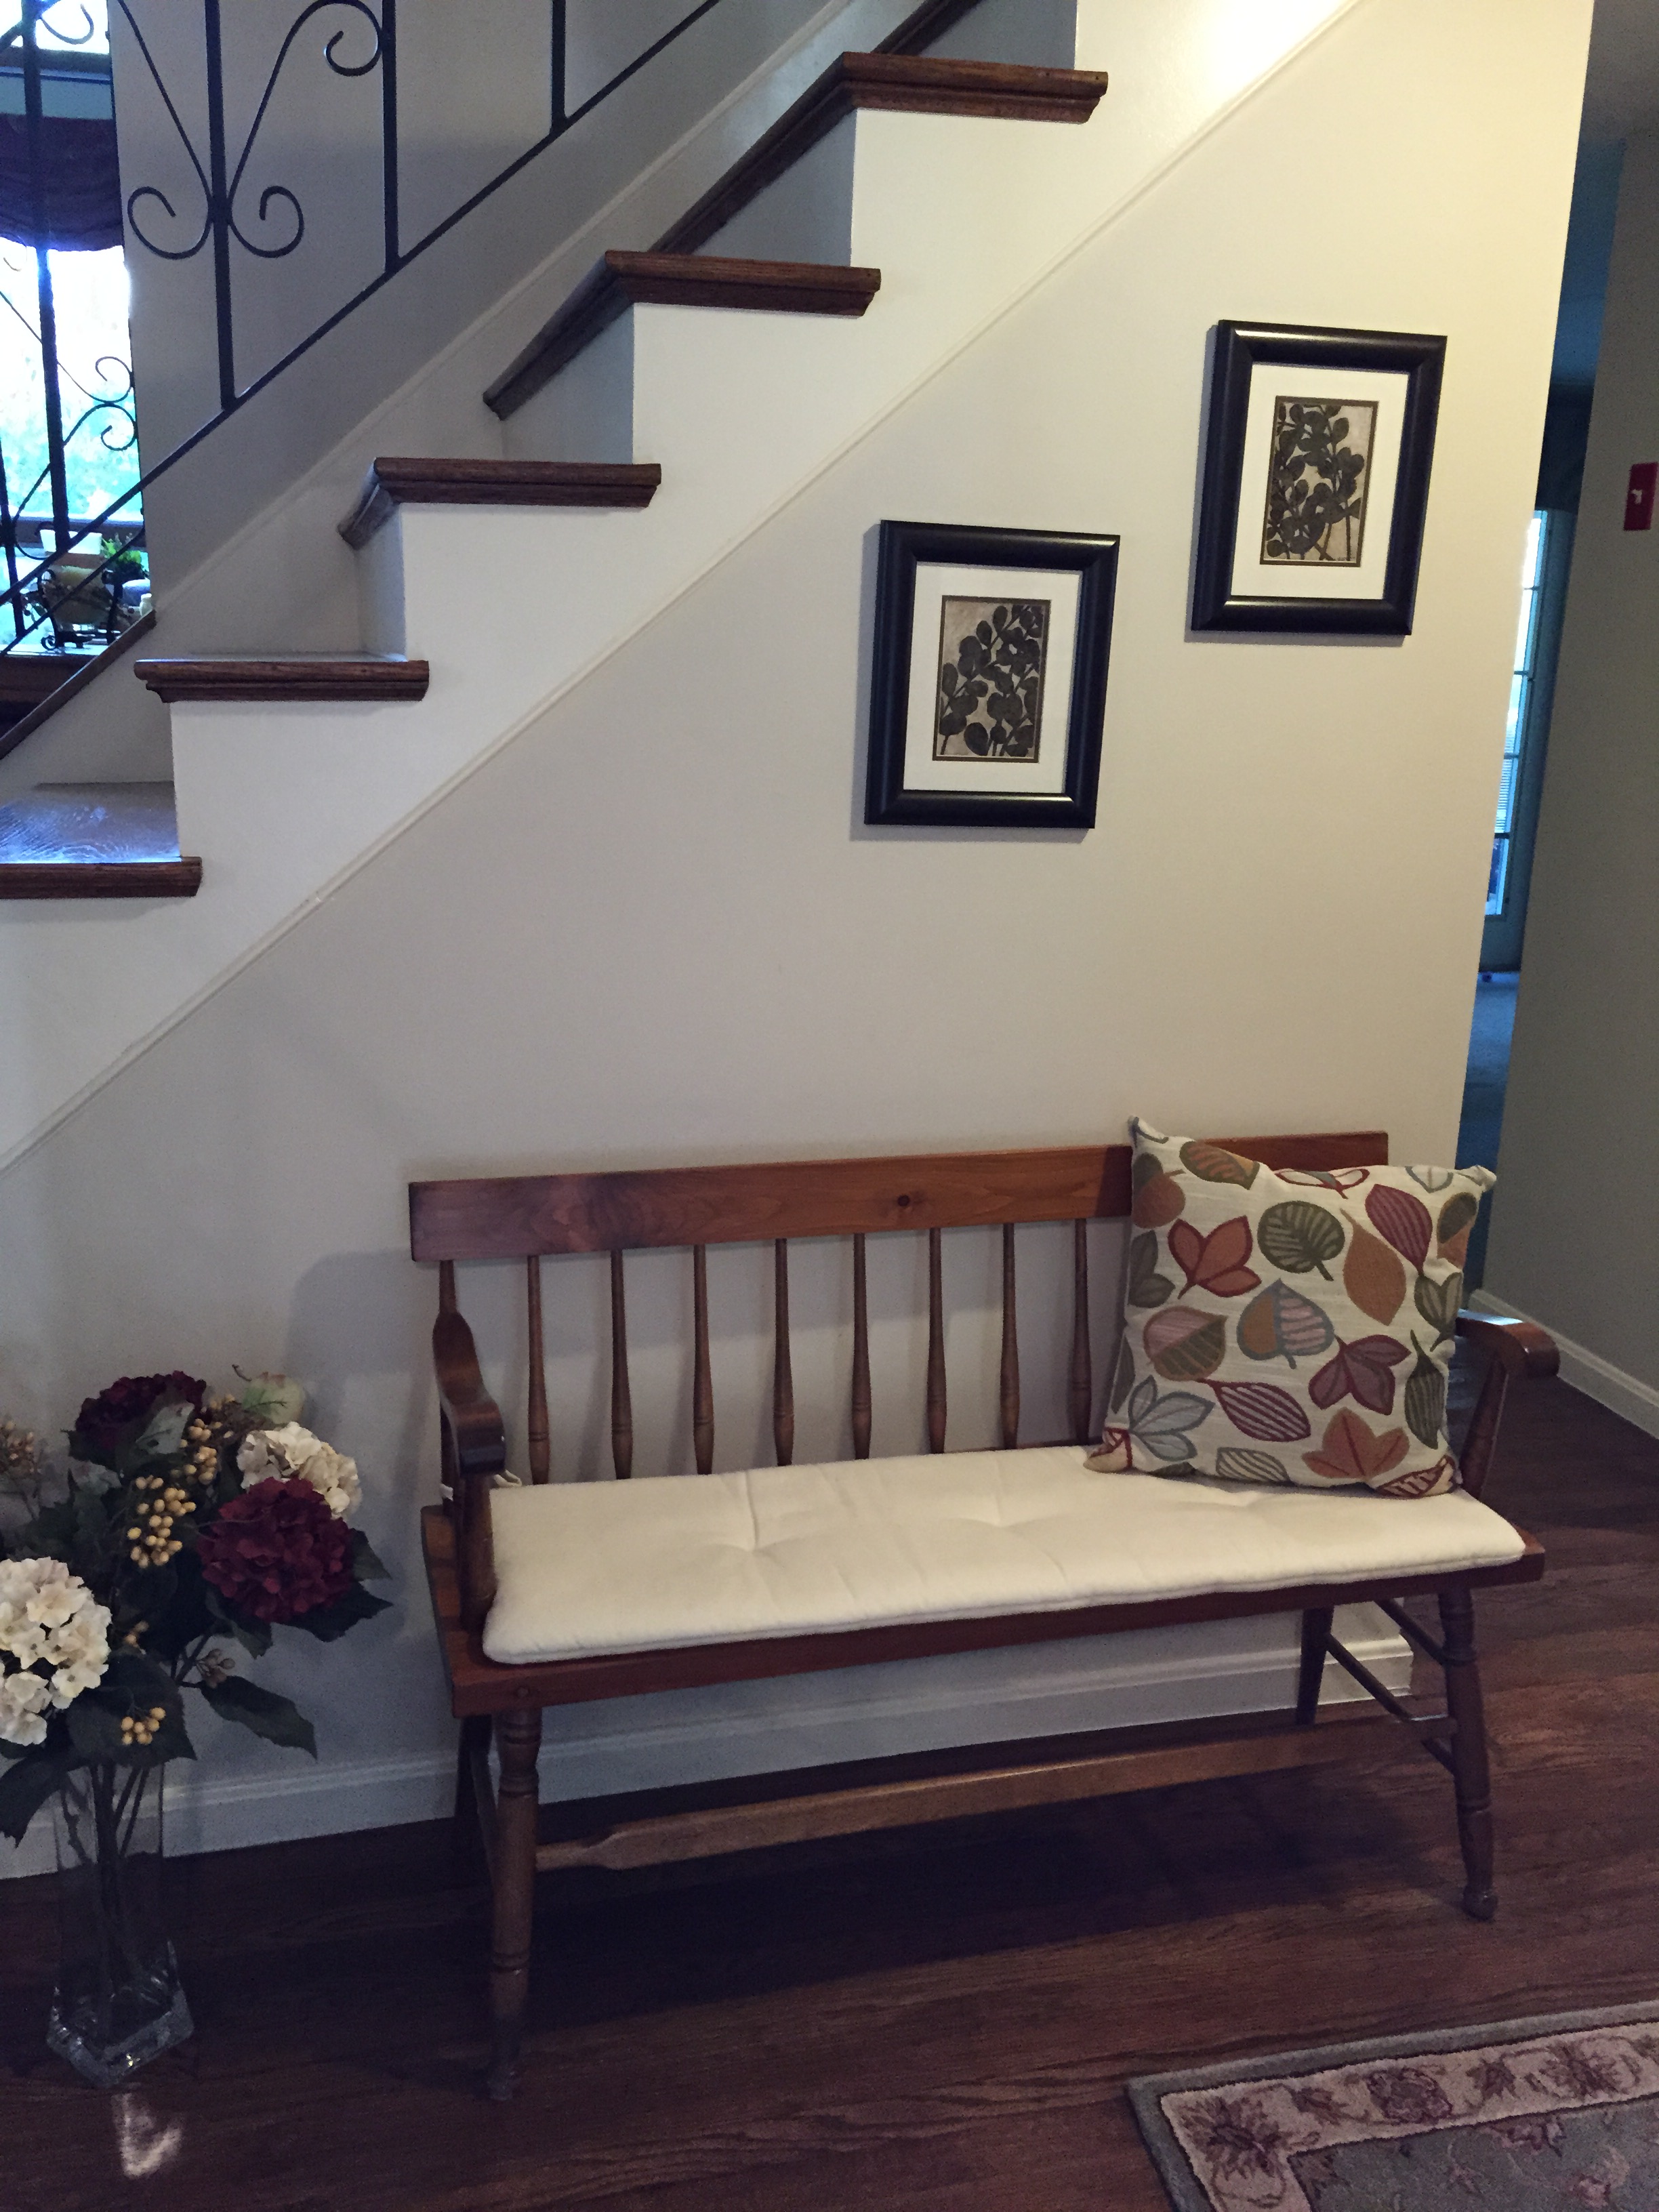 Before & After: Project Foxhollow Reveal | Kelly Rogers Interiors | Interiors for Families